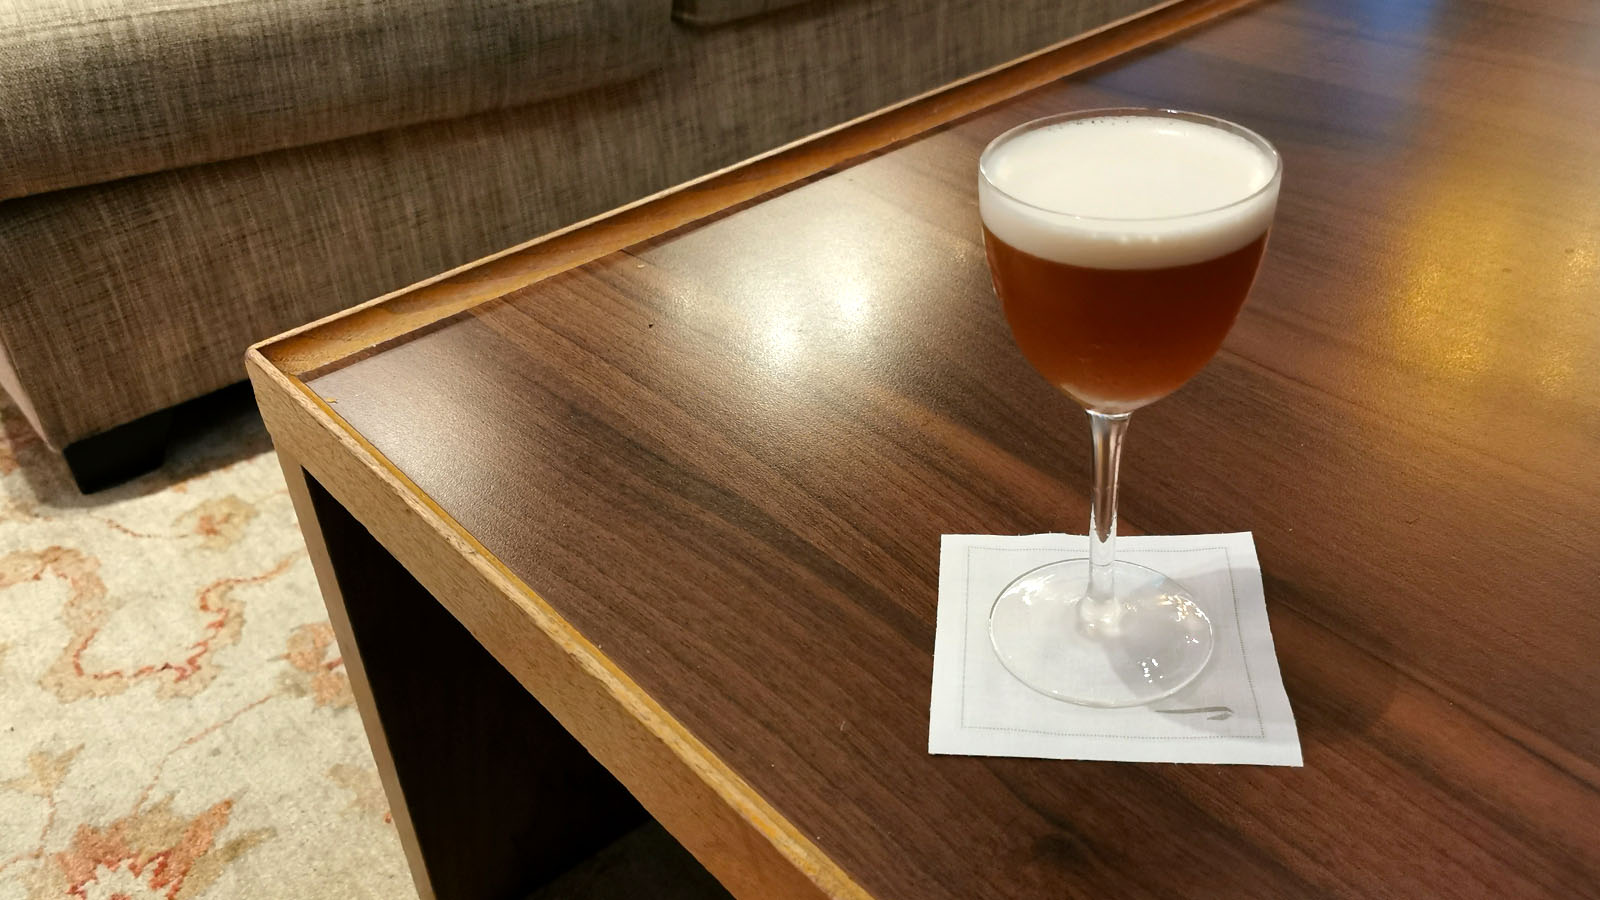 Cocktail in the BA Concorde Room at London Heathrow